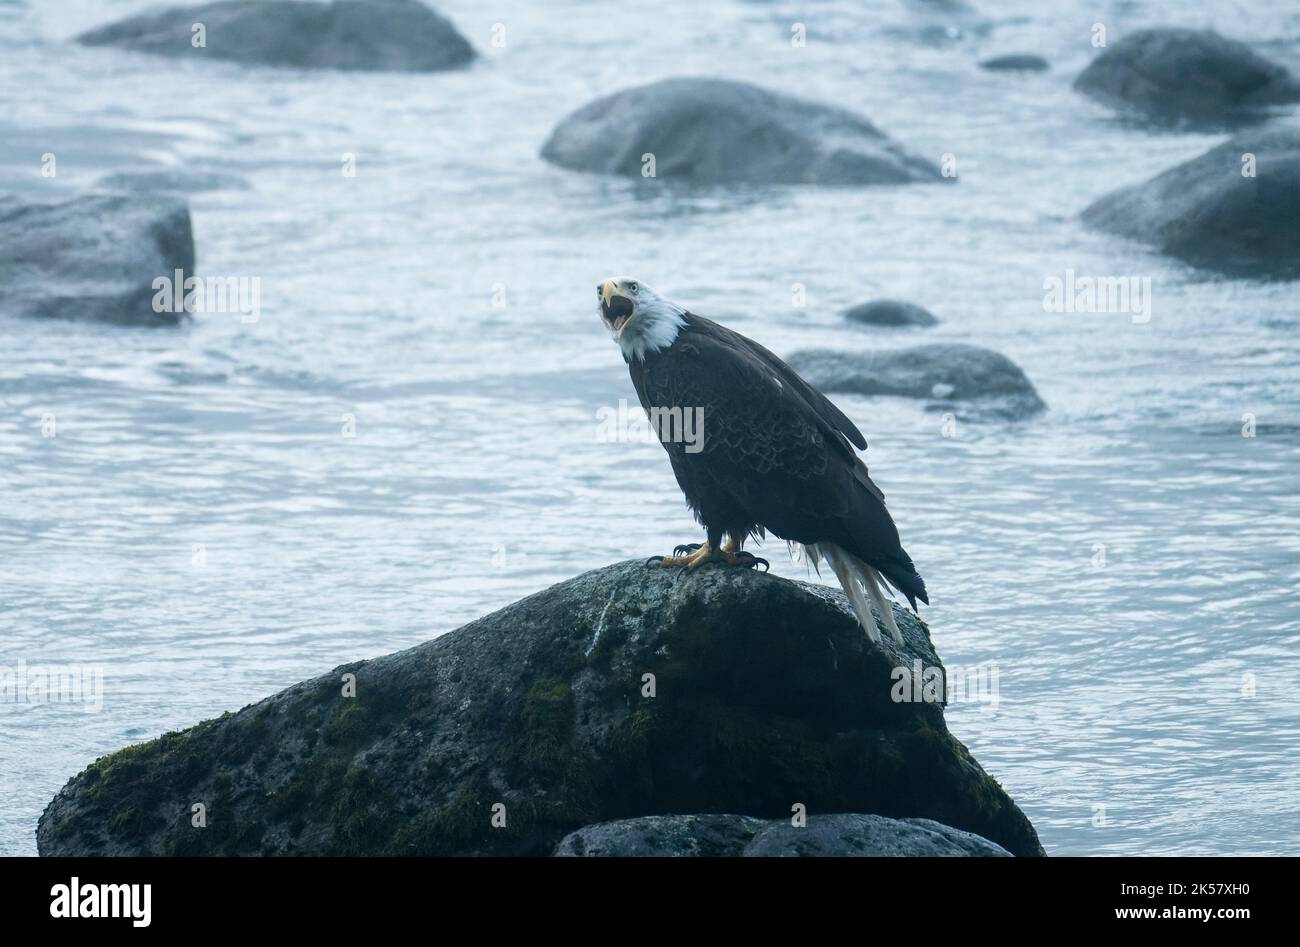 A bald eagle (Haliaeetus leucocephalus) screeches from a rock in the Chilkoot River in Alaska. Stock Photo